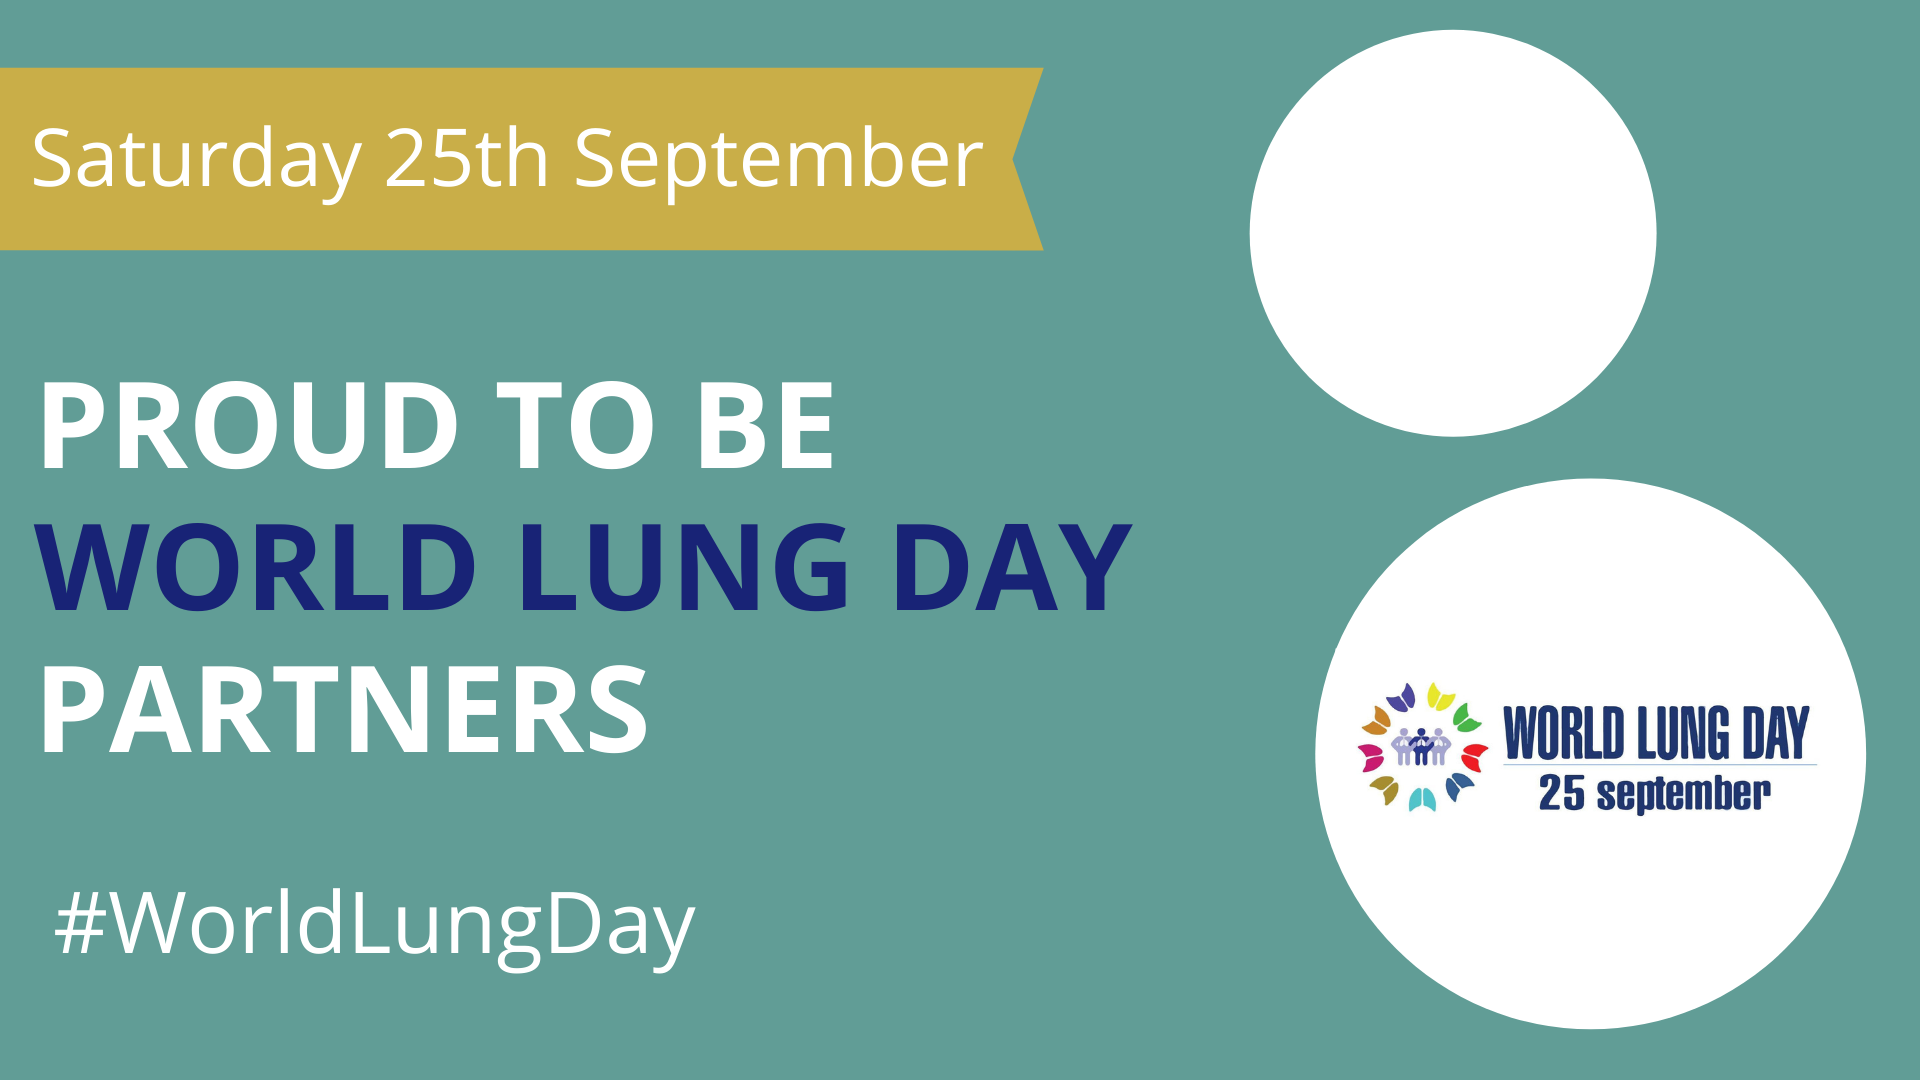 On World Lung Day FIRS calls for global investment in respiratory health